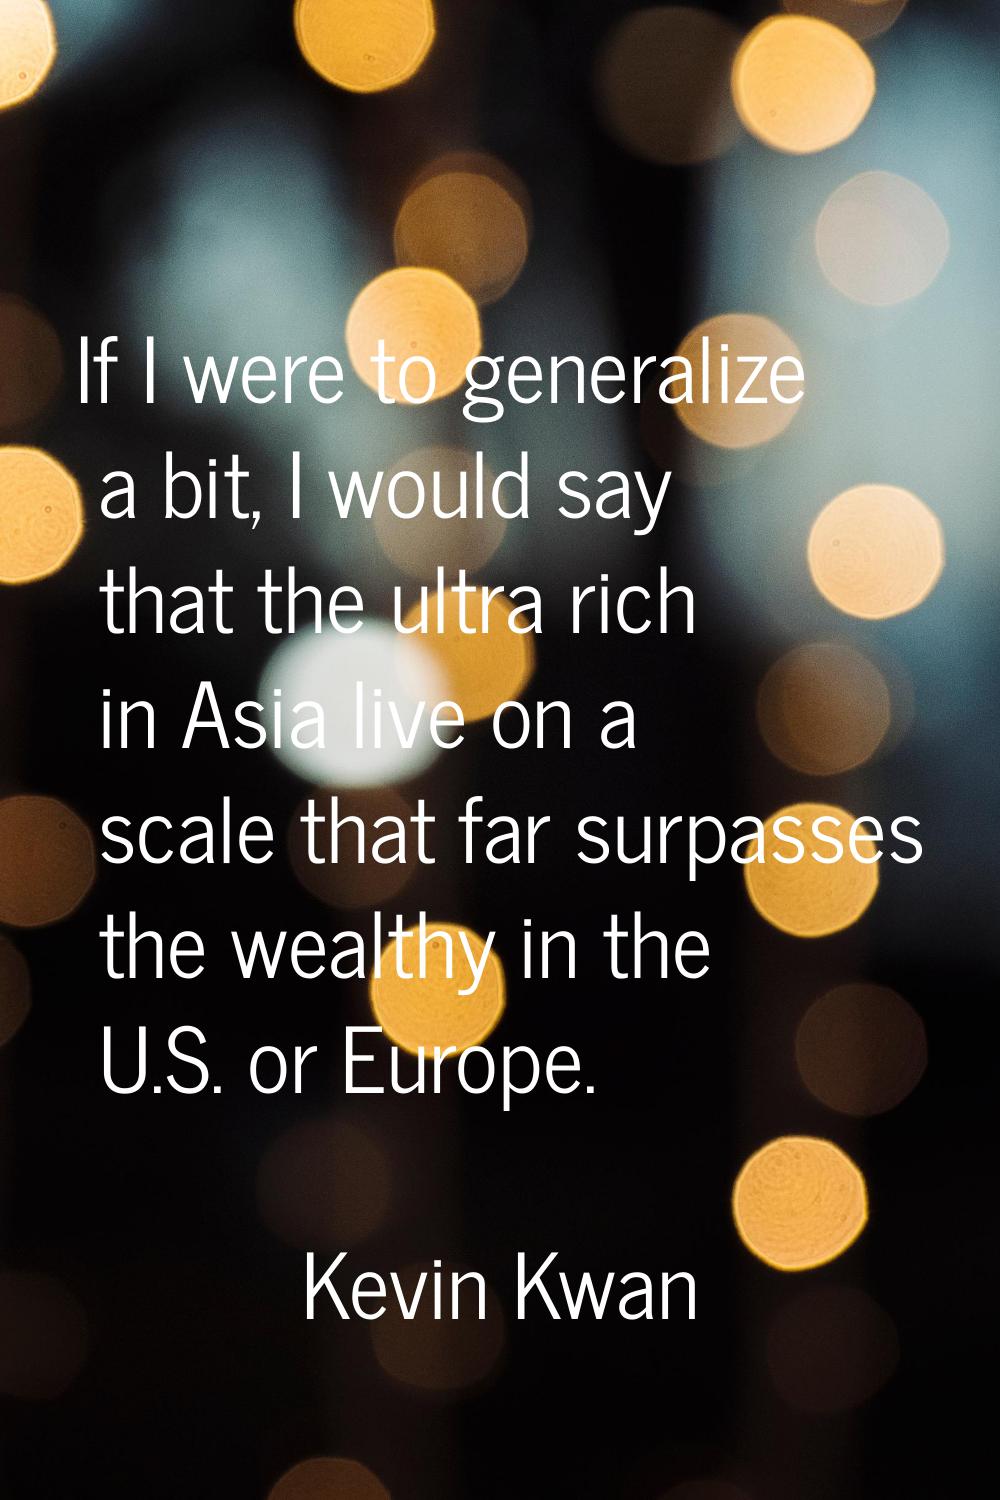 If I were to generalize a bit, I would say that the ultra rich in Asia live on a scale that far sur